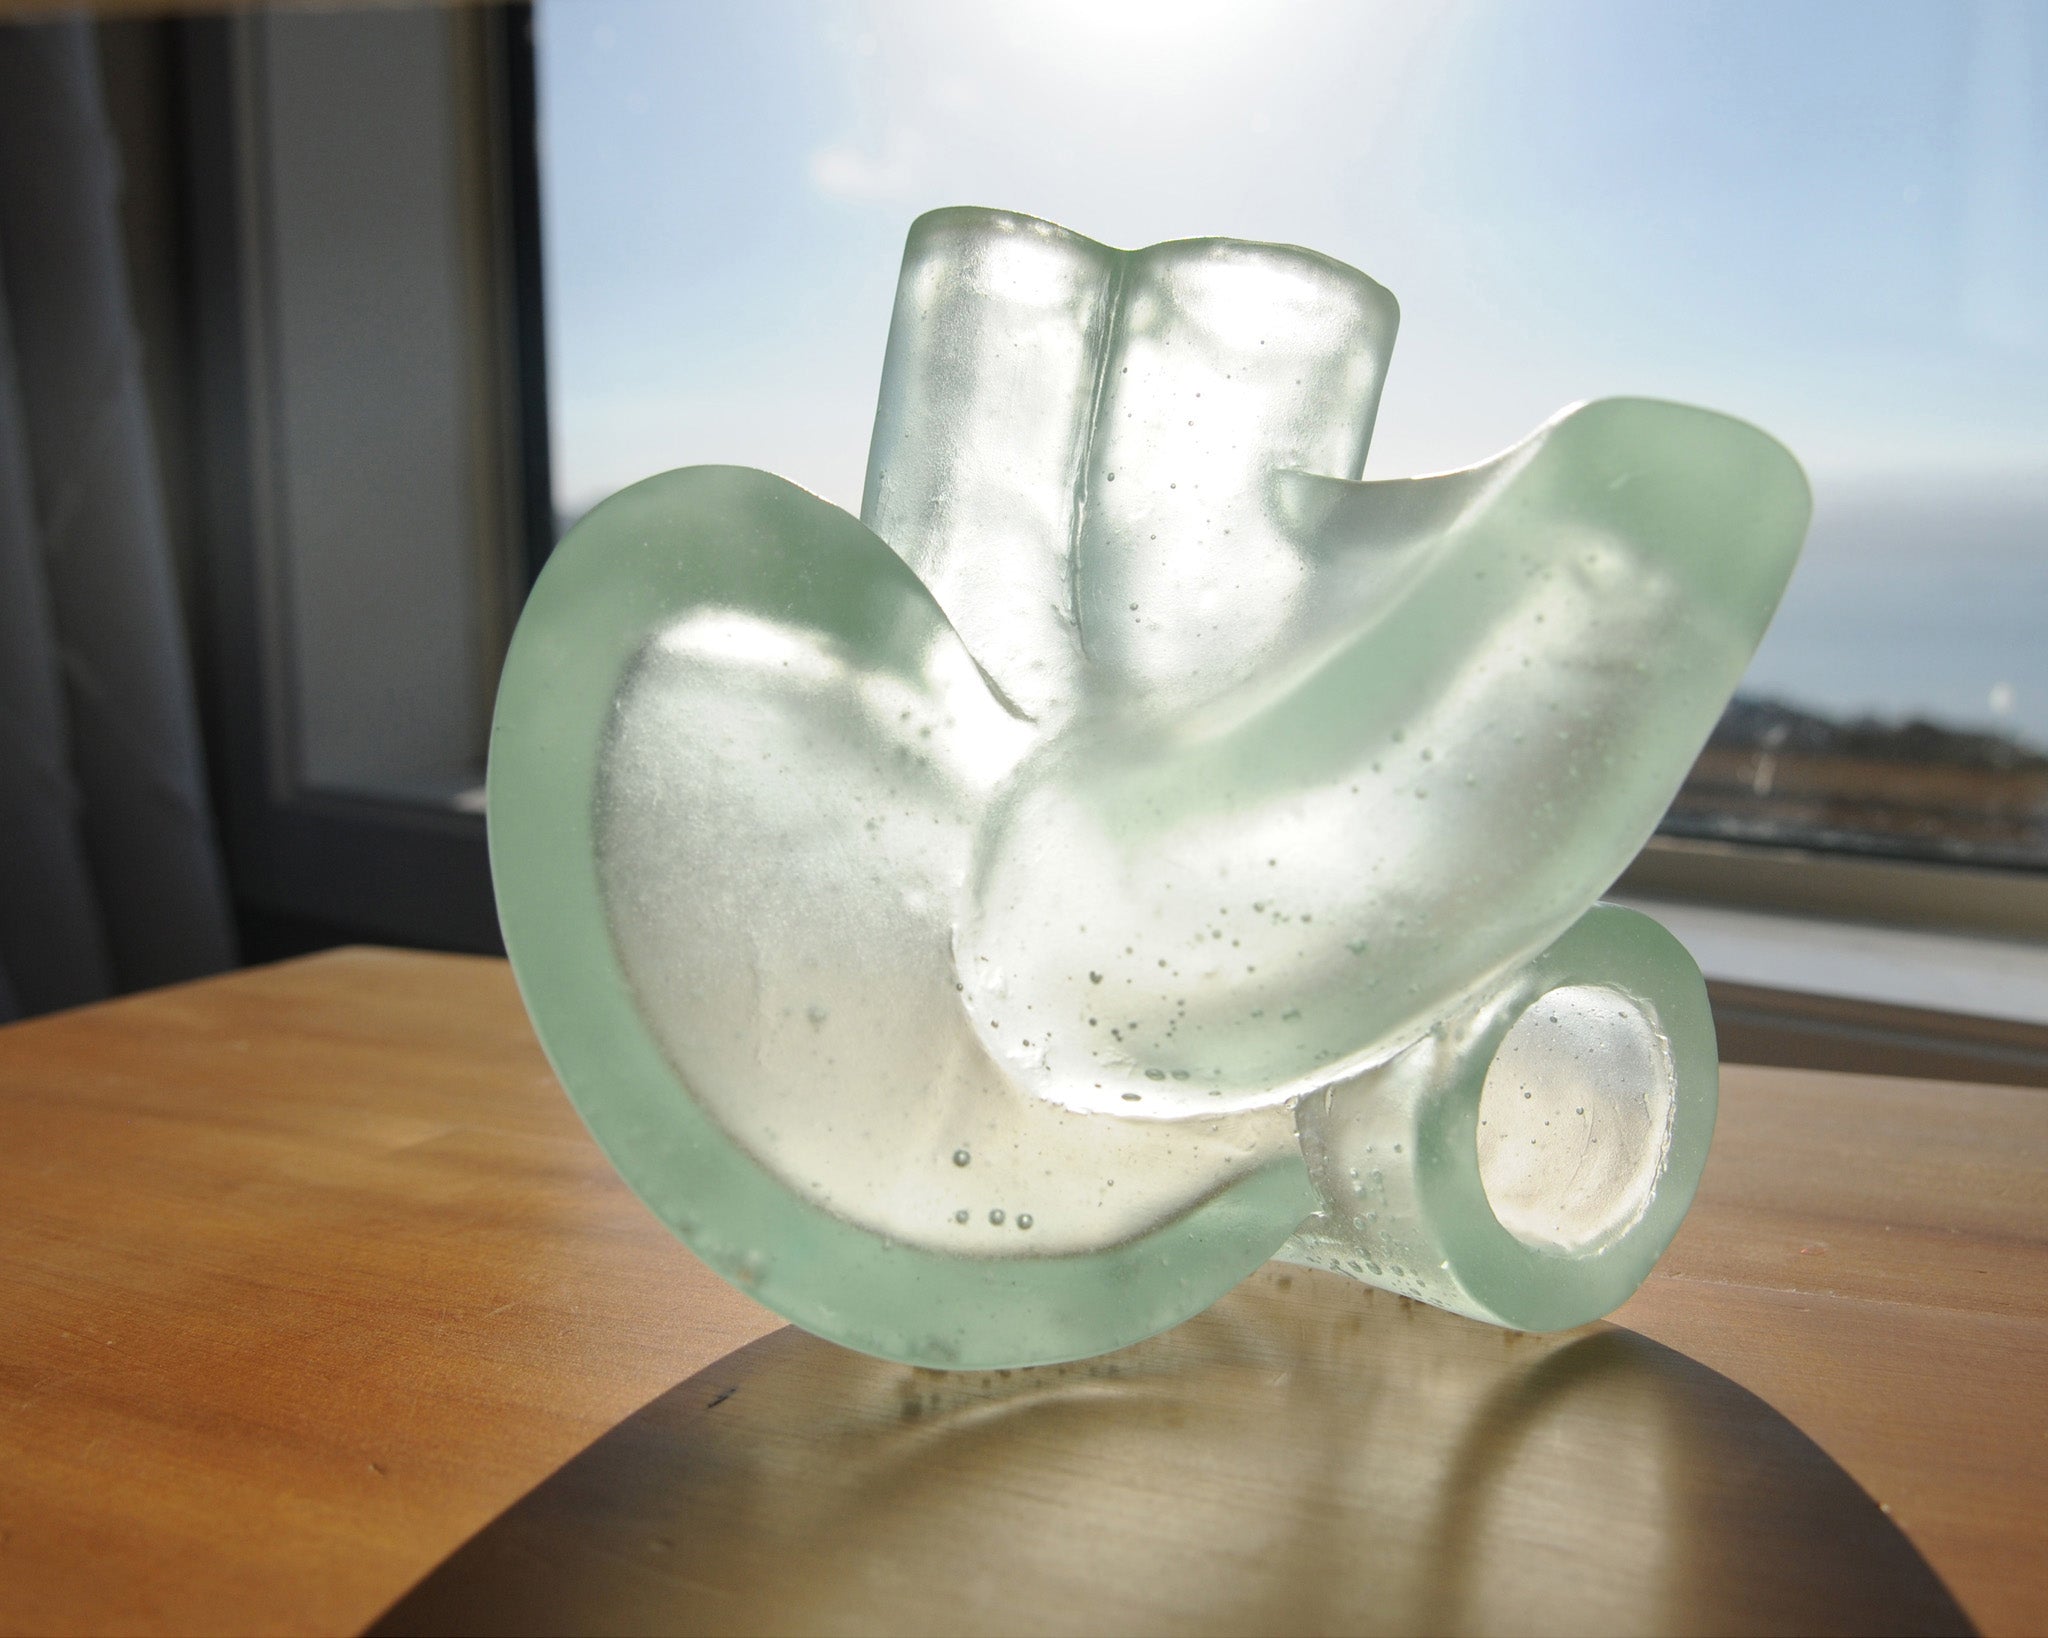 Abstract cast glass sculpture of the heart by Stephen Williams.